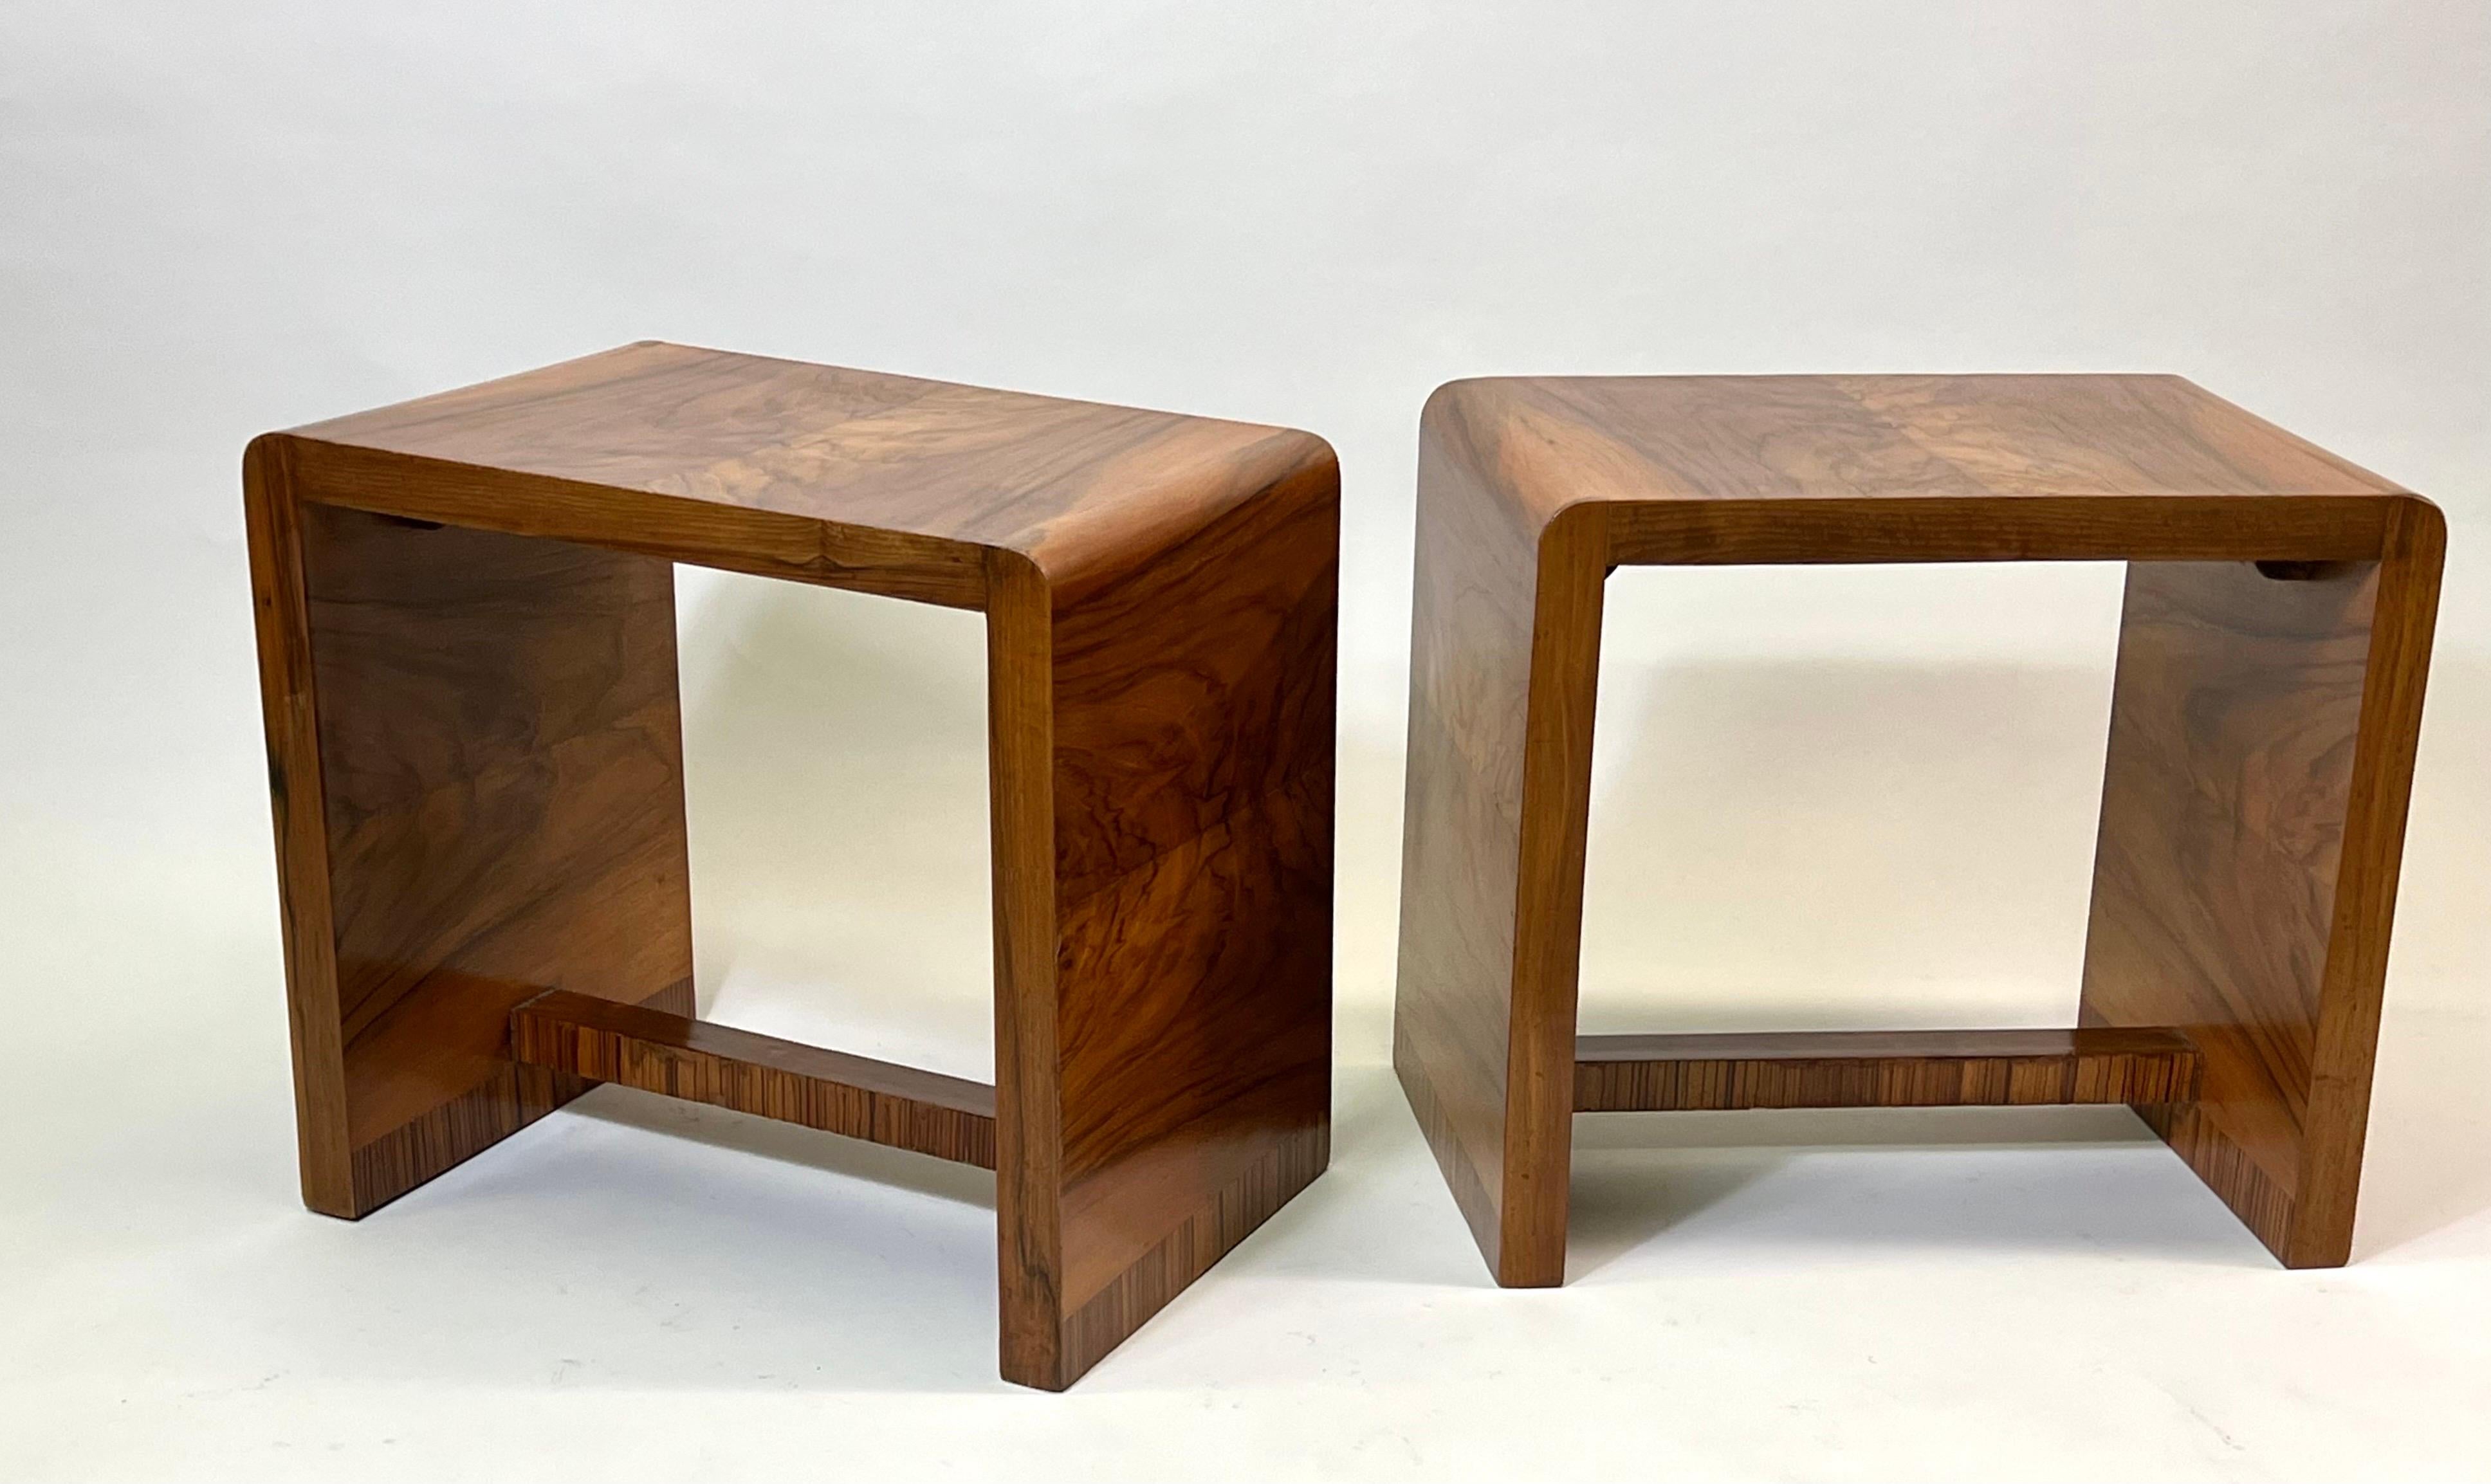 An Important Pair of Italian Midcentury Modern 'Rationalist' Benches / Stools in Elm Wood Attributed to Giuseppe Pagano Pogatschnig. The benches are pure unfettered lines and form, composed  in a pure rectangular form of 2 support sides and a top